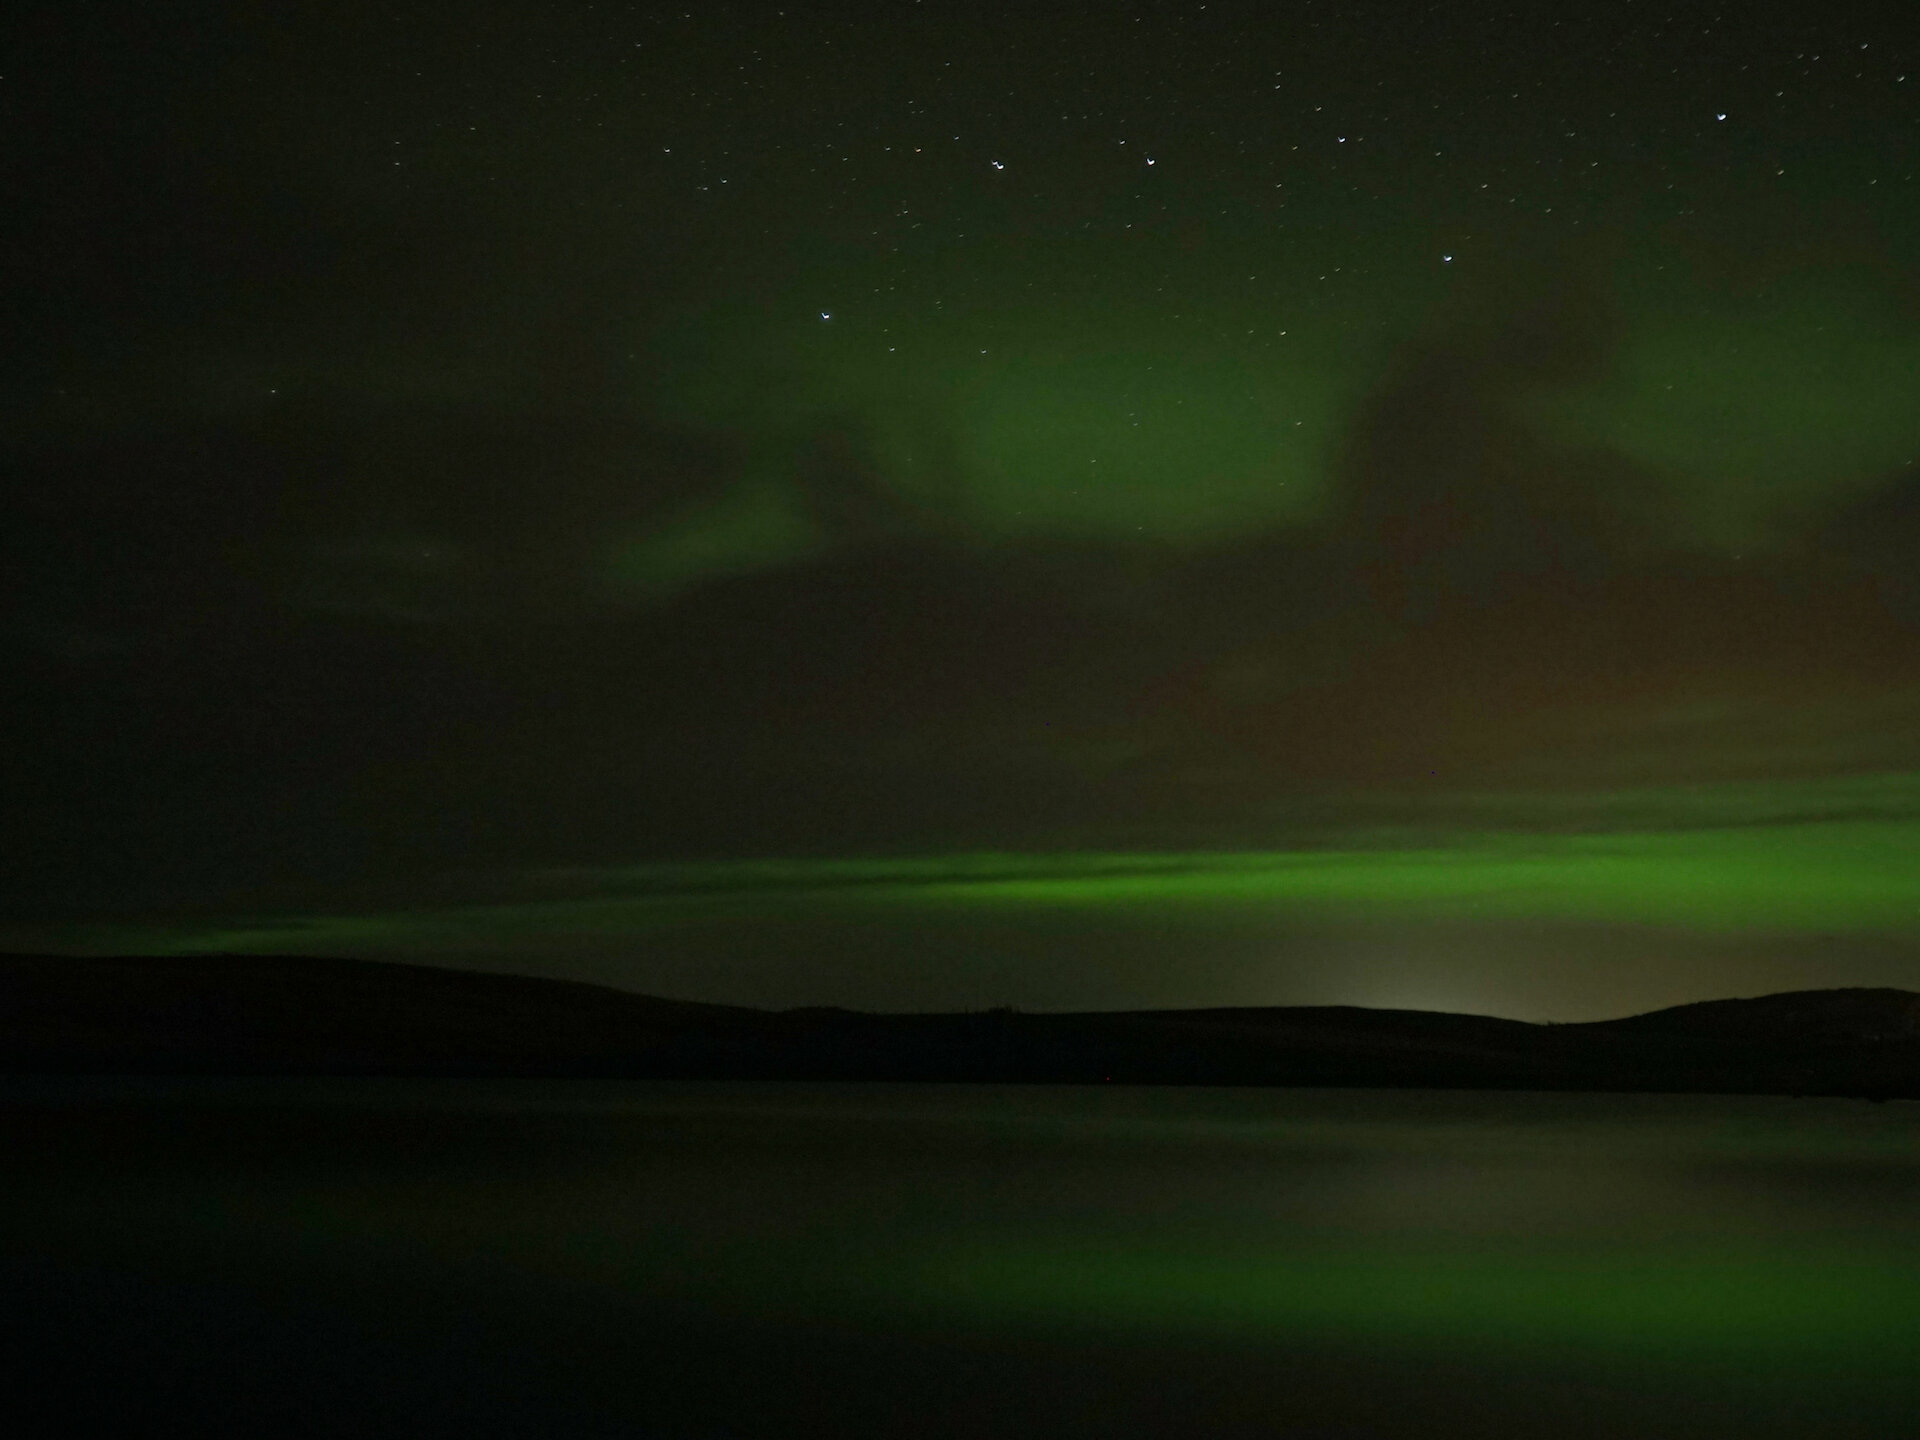 The northern lights are known in Shetland as mirrie dancers